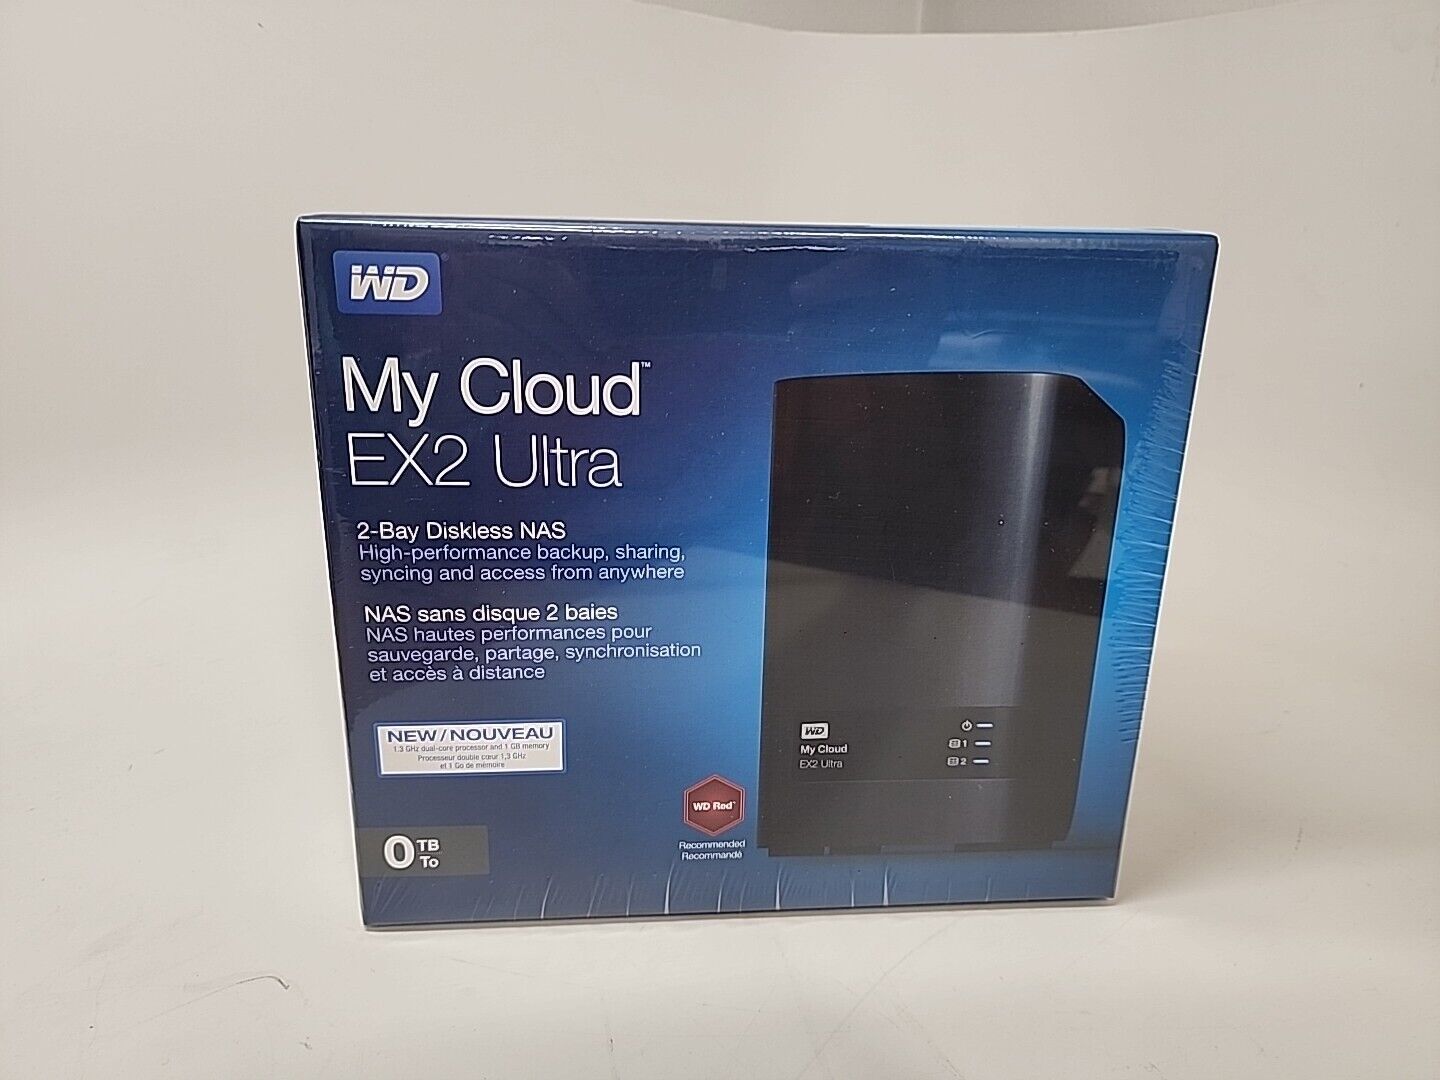 WD - My Cloud Expert EX2 Ultra 2-Bay 0TB External Network Attached Storage NAS